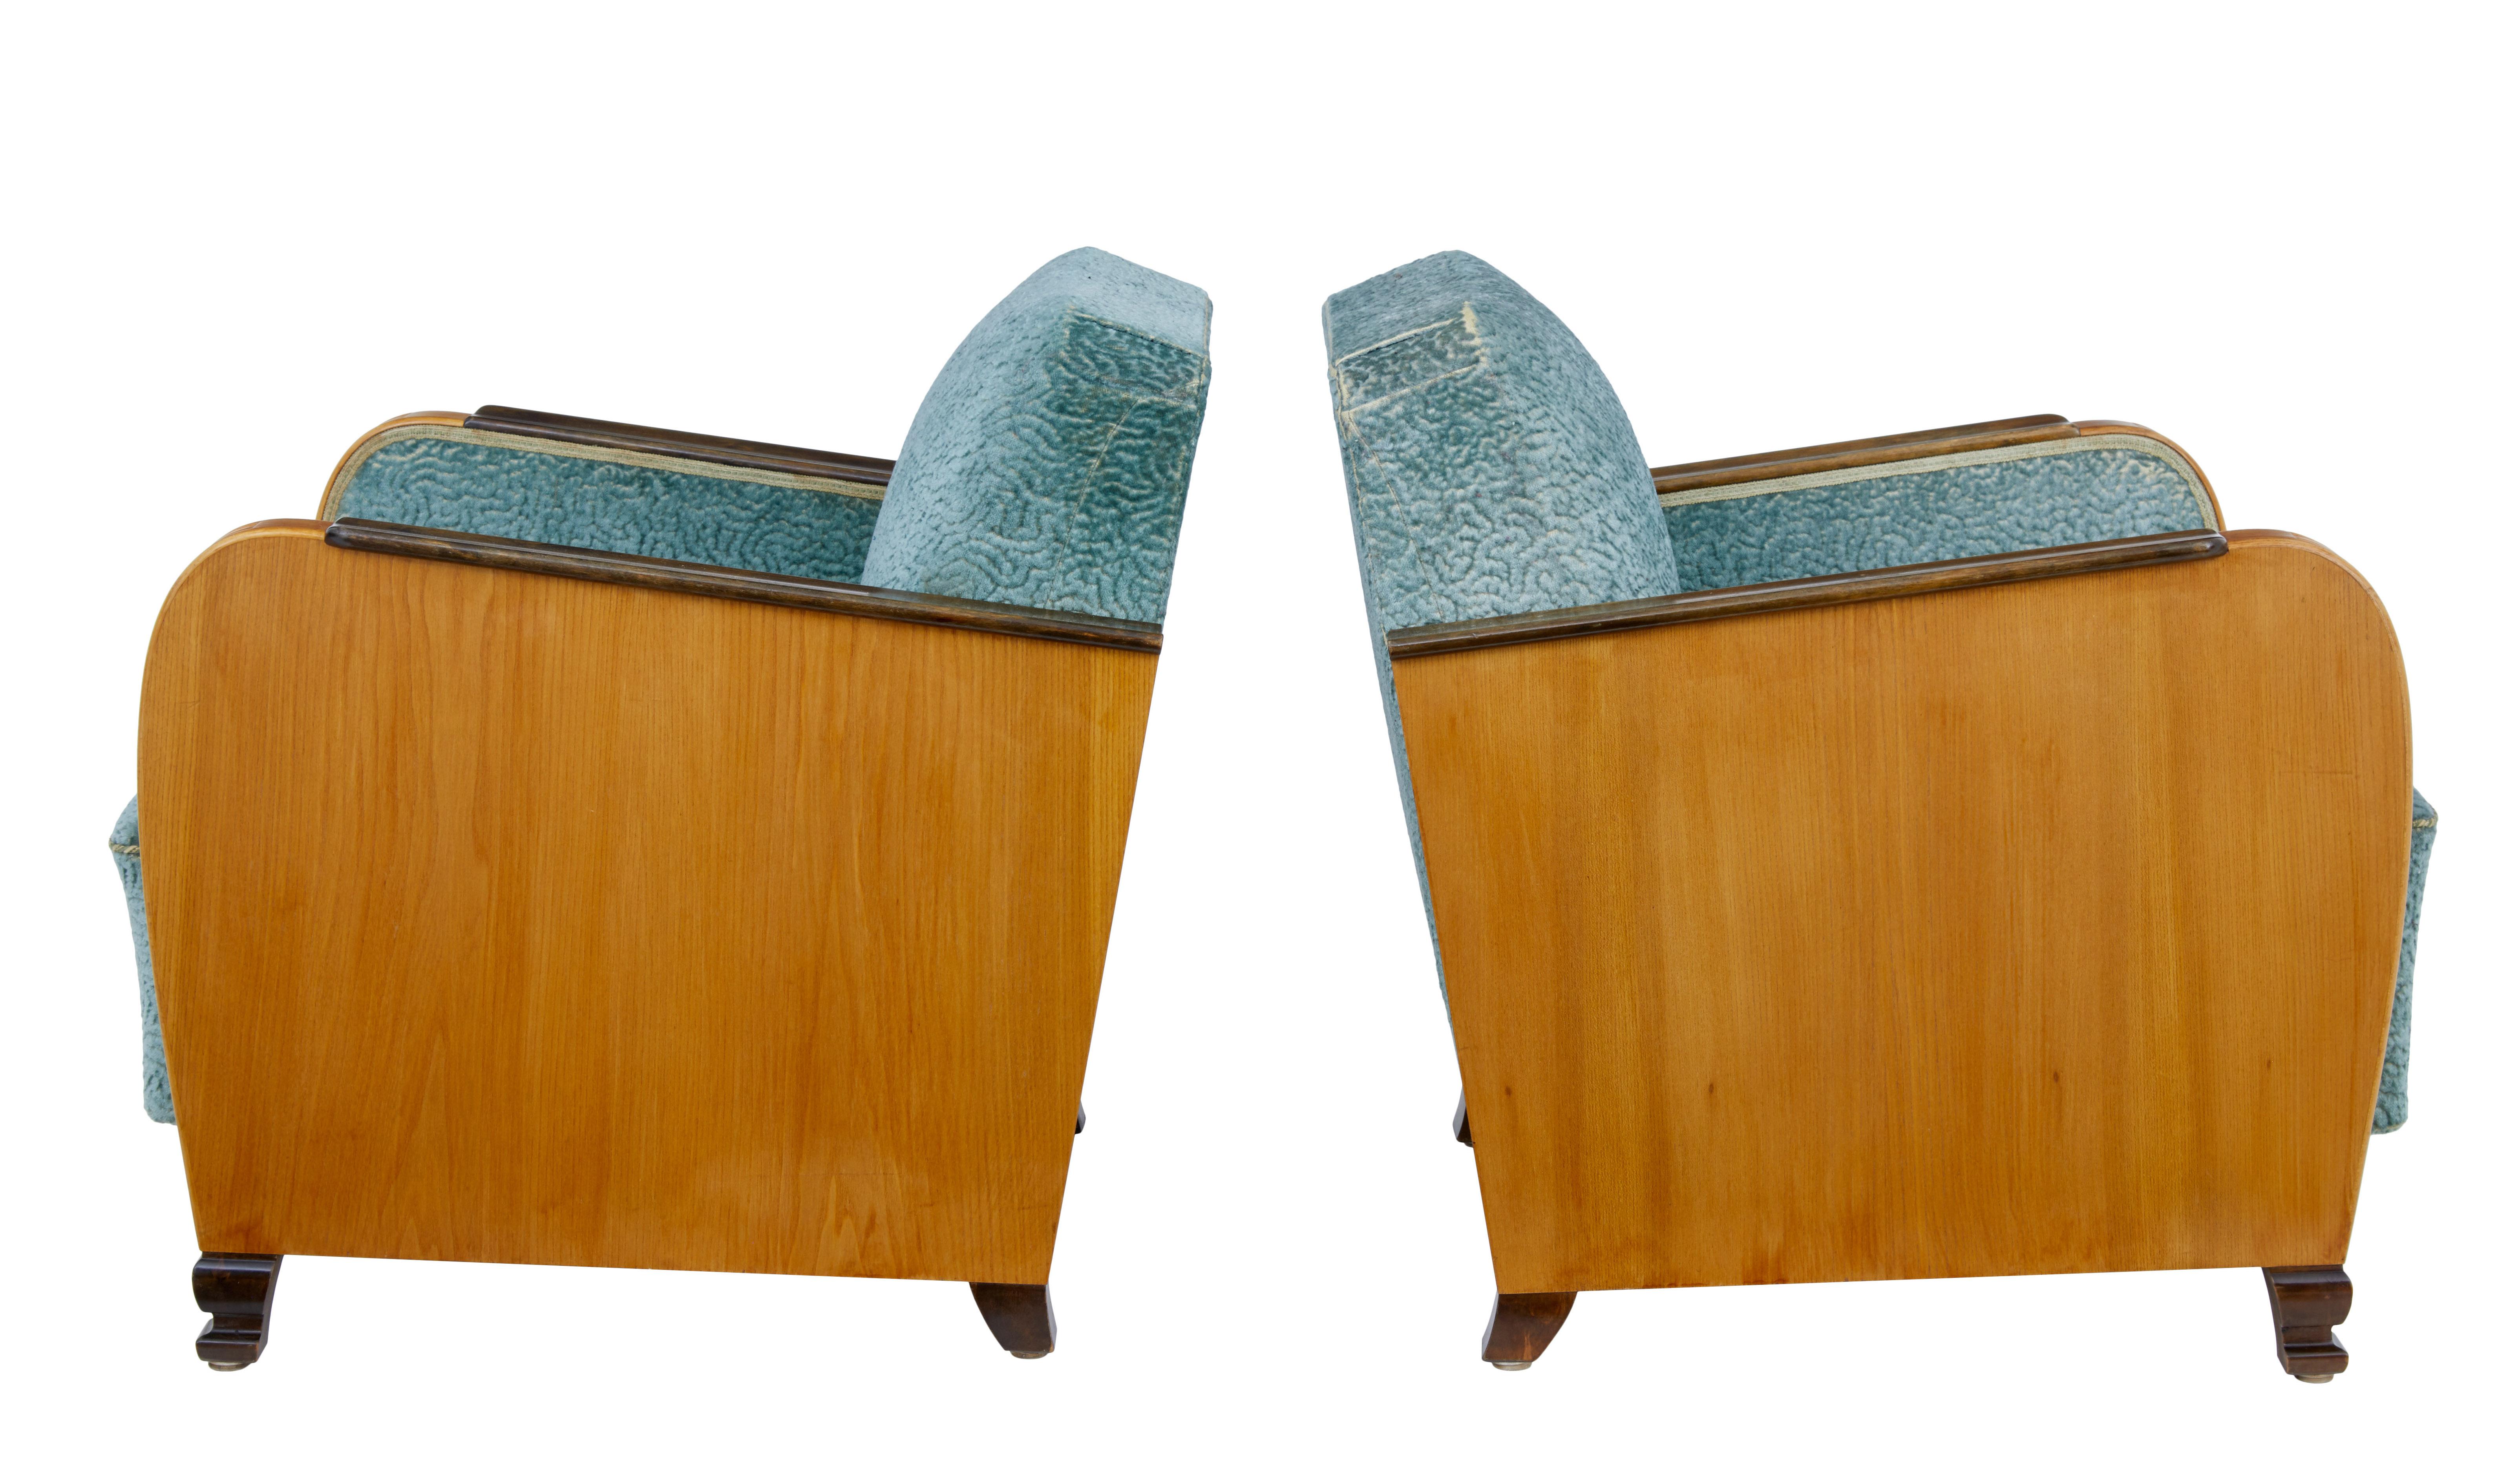 Excellent quality pair of armchairs, circa 1940.

Elegant pair of late art deco chairs, featuring beautiful elm sides and arms. Arms with channeled detailing to the fronts. Applied stained birch shaped arm rests and matching feet.

Original